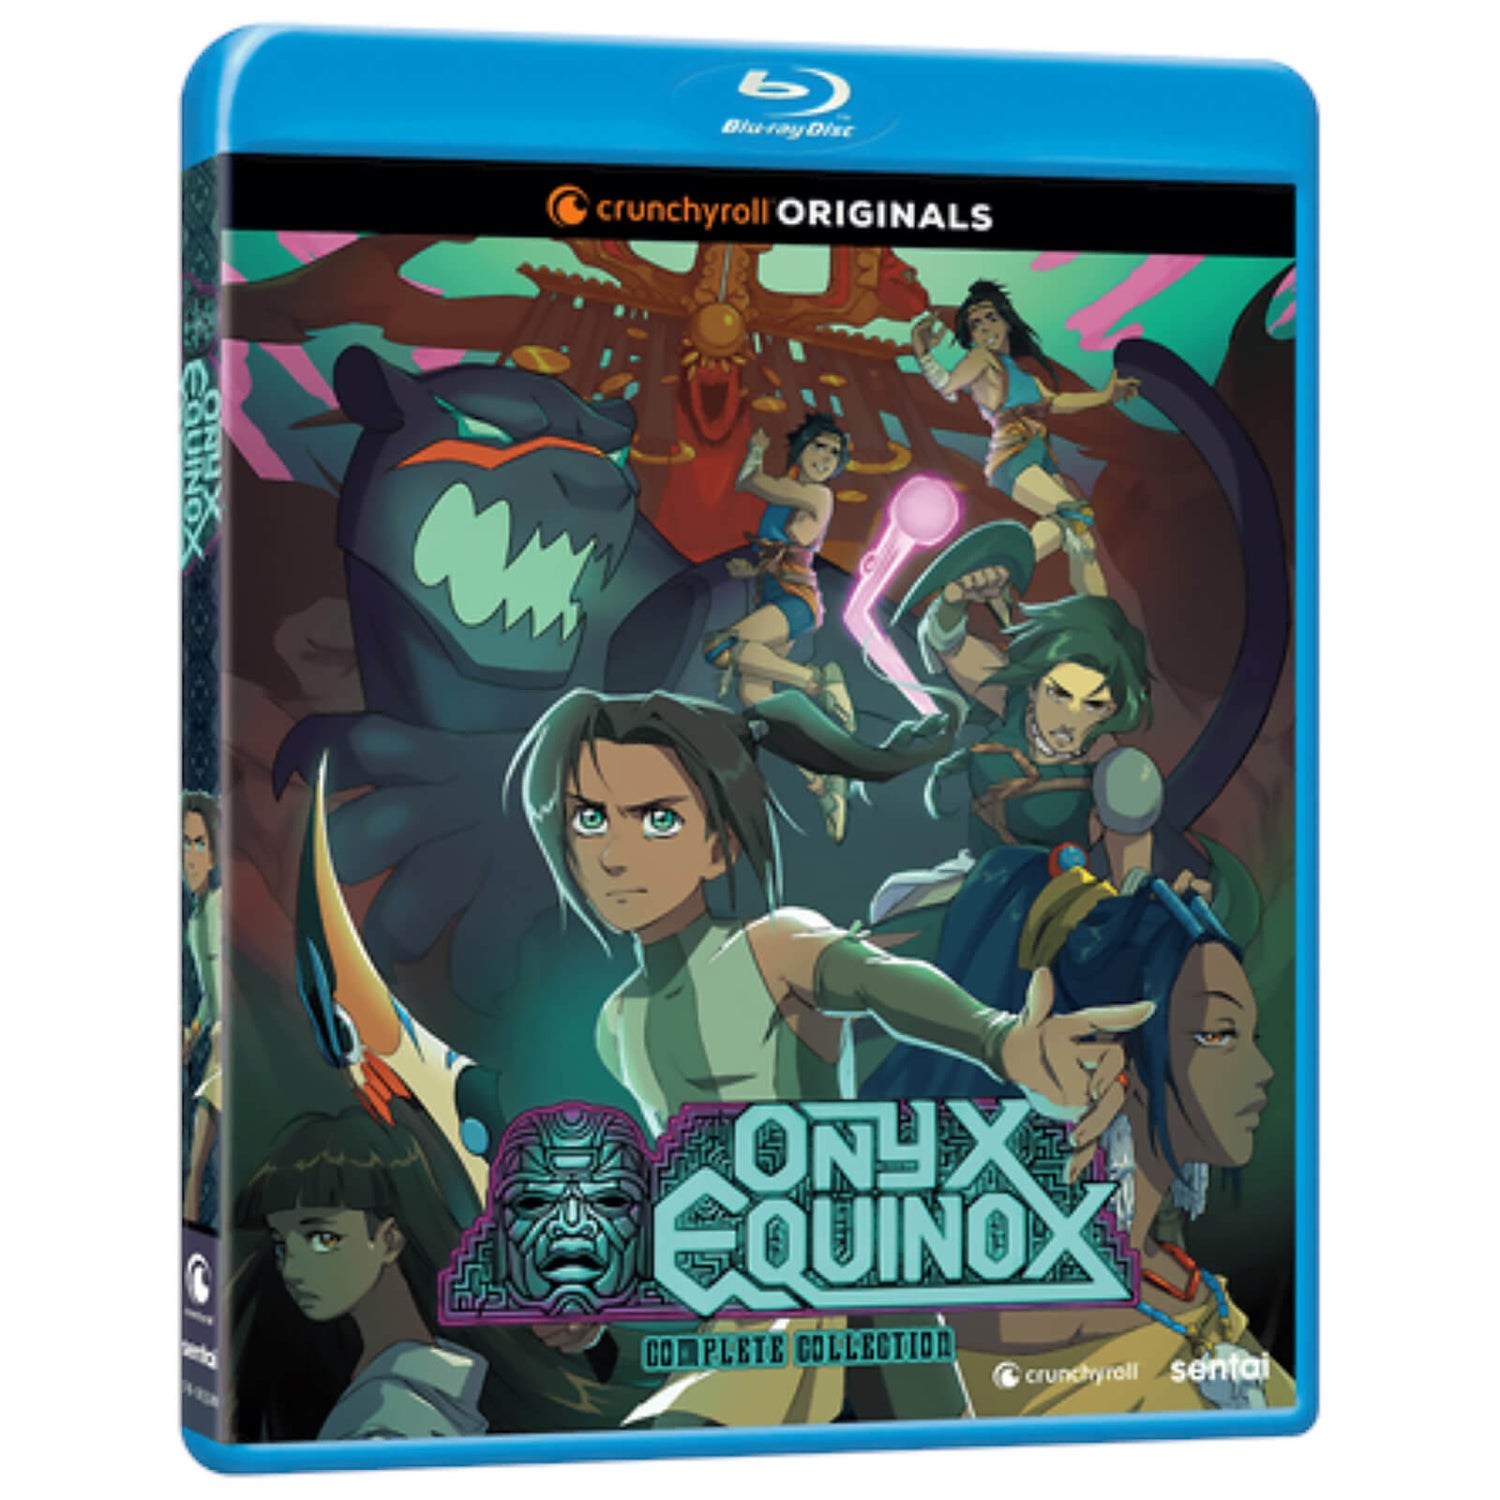 Onyx Equinox: Complete Collection (US Import)